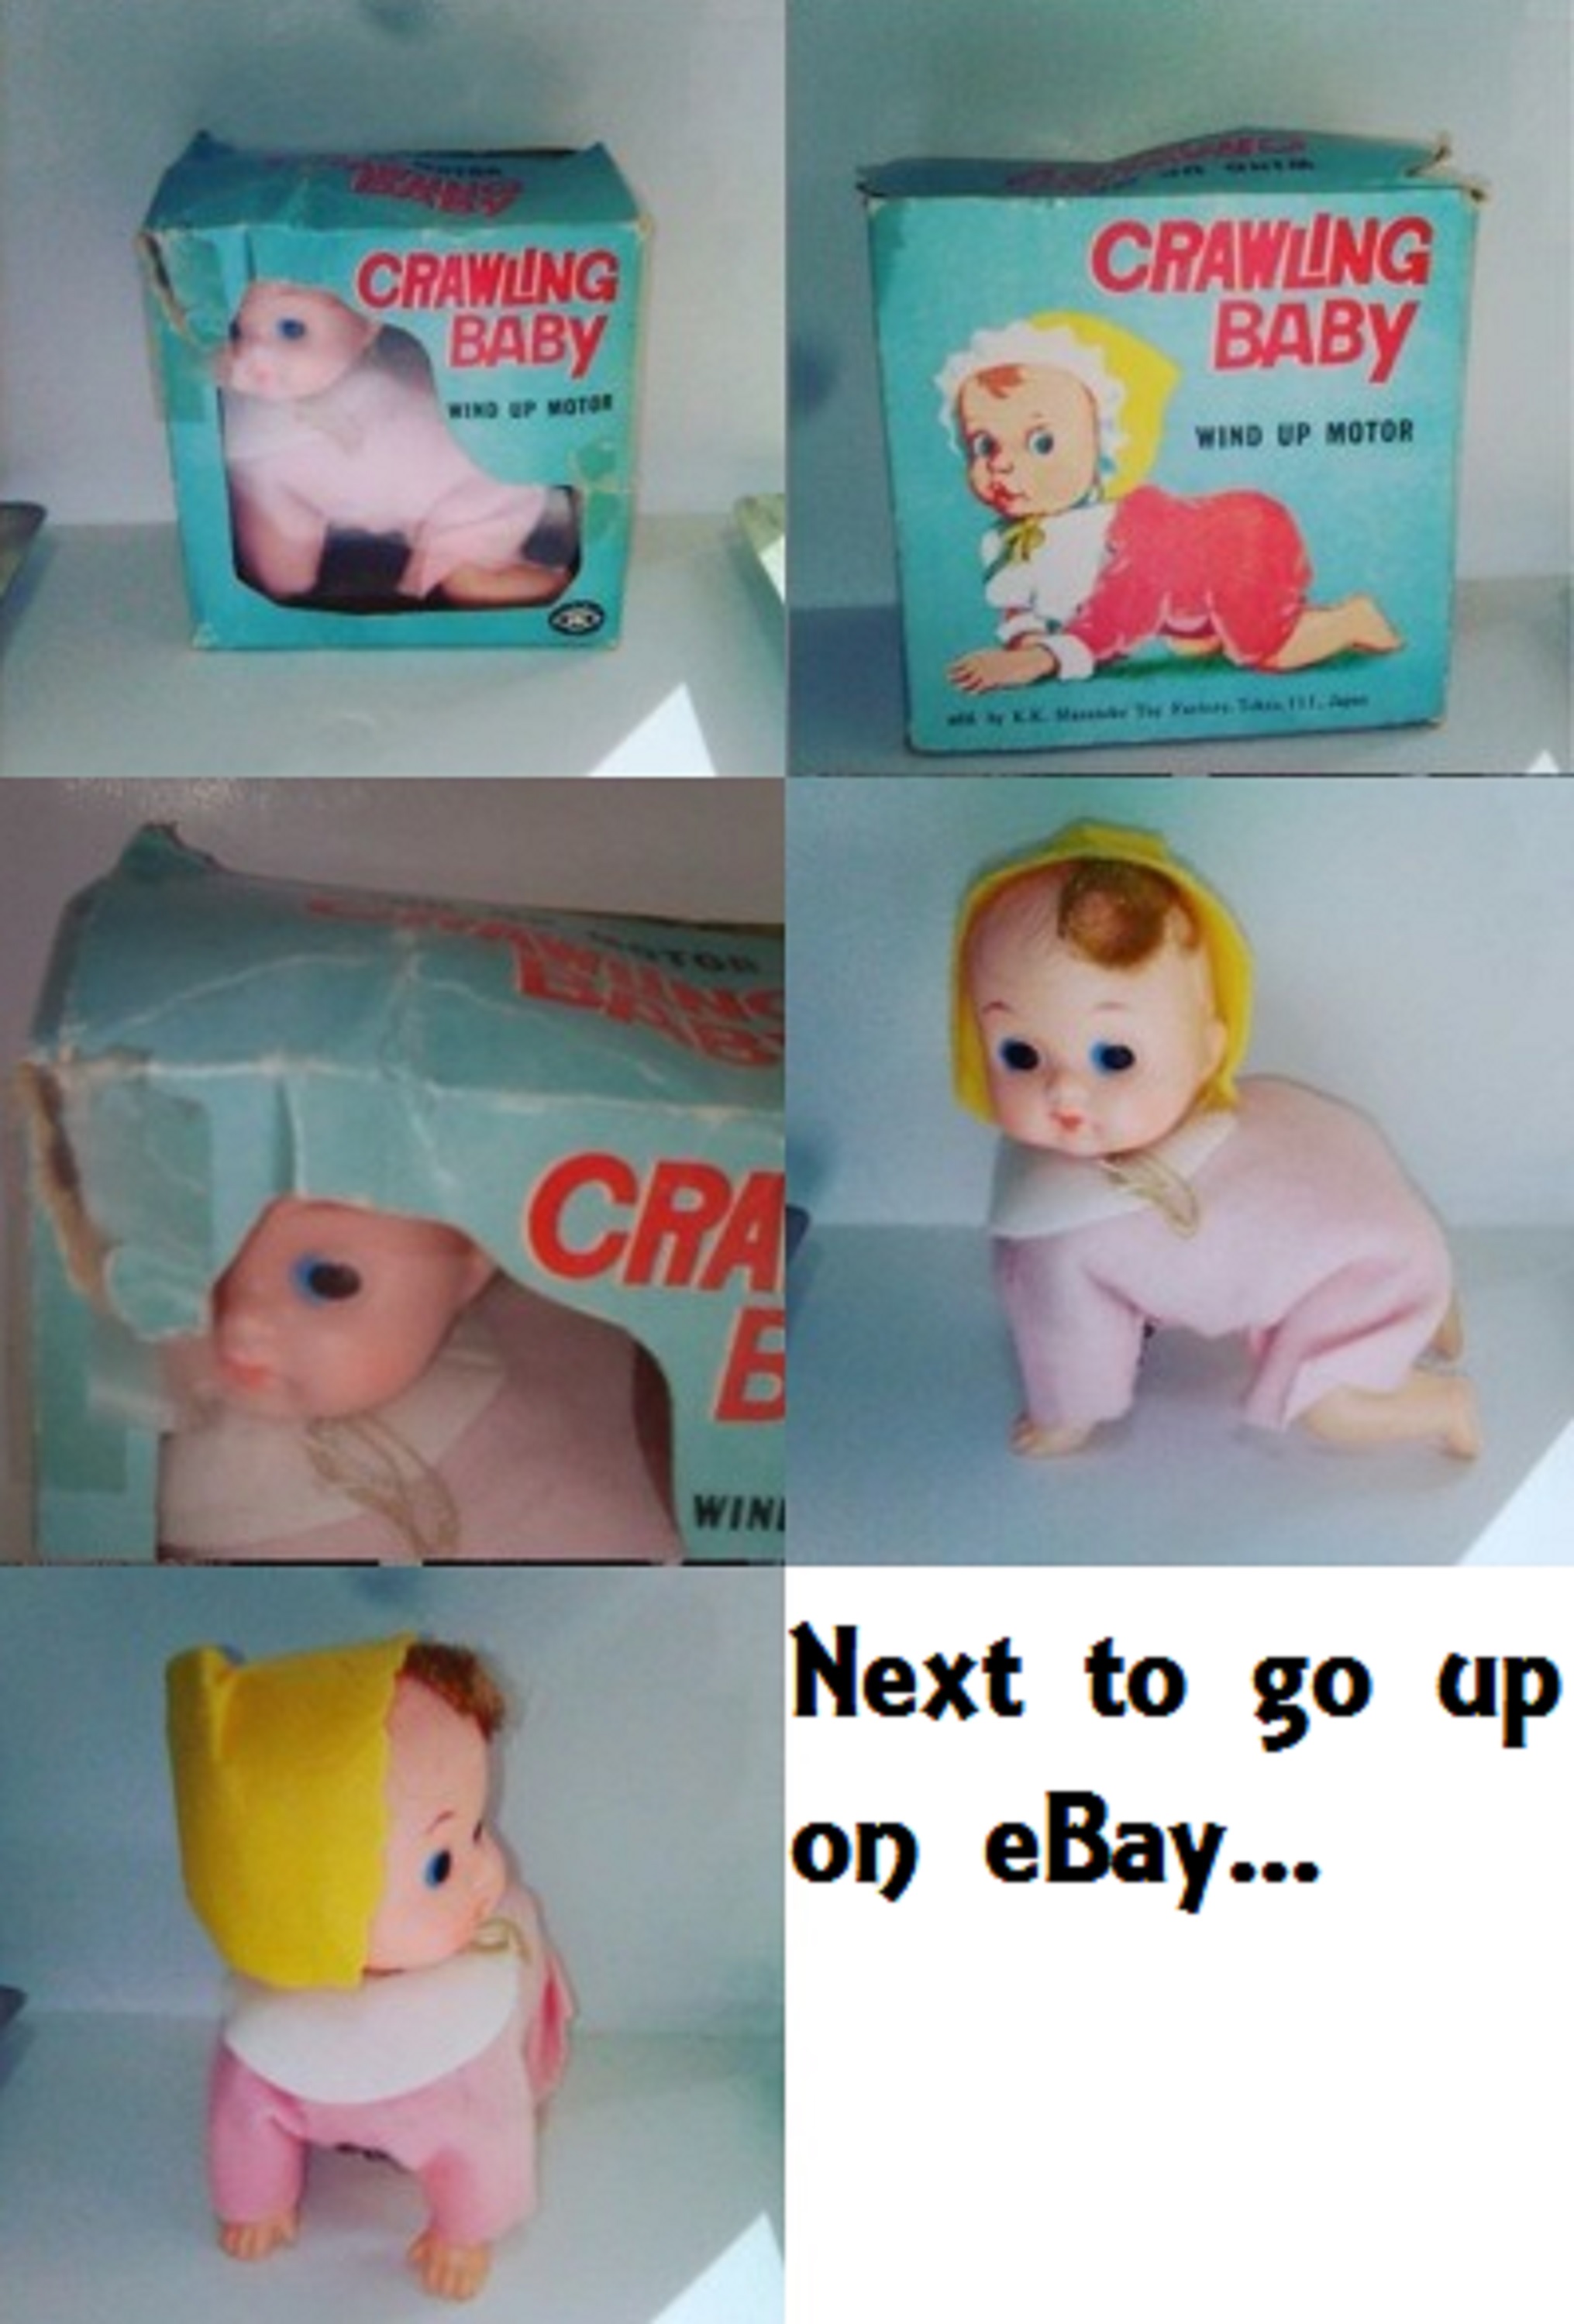 Collage I made on LunaPic.com of the photos I took of the doll I want to put up next on eBay